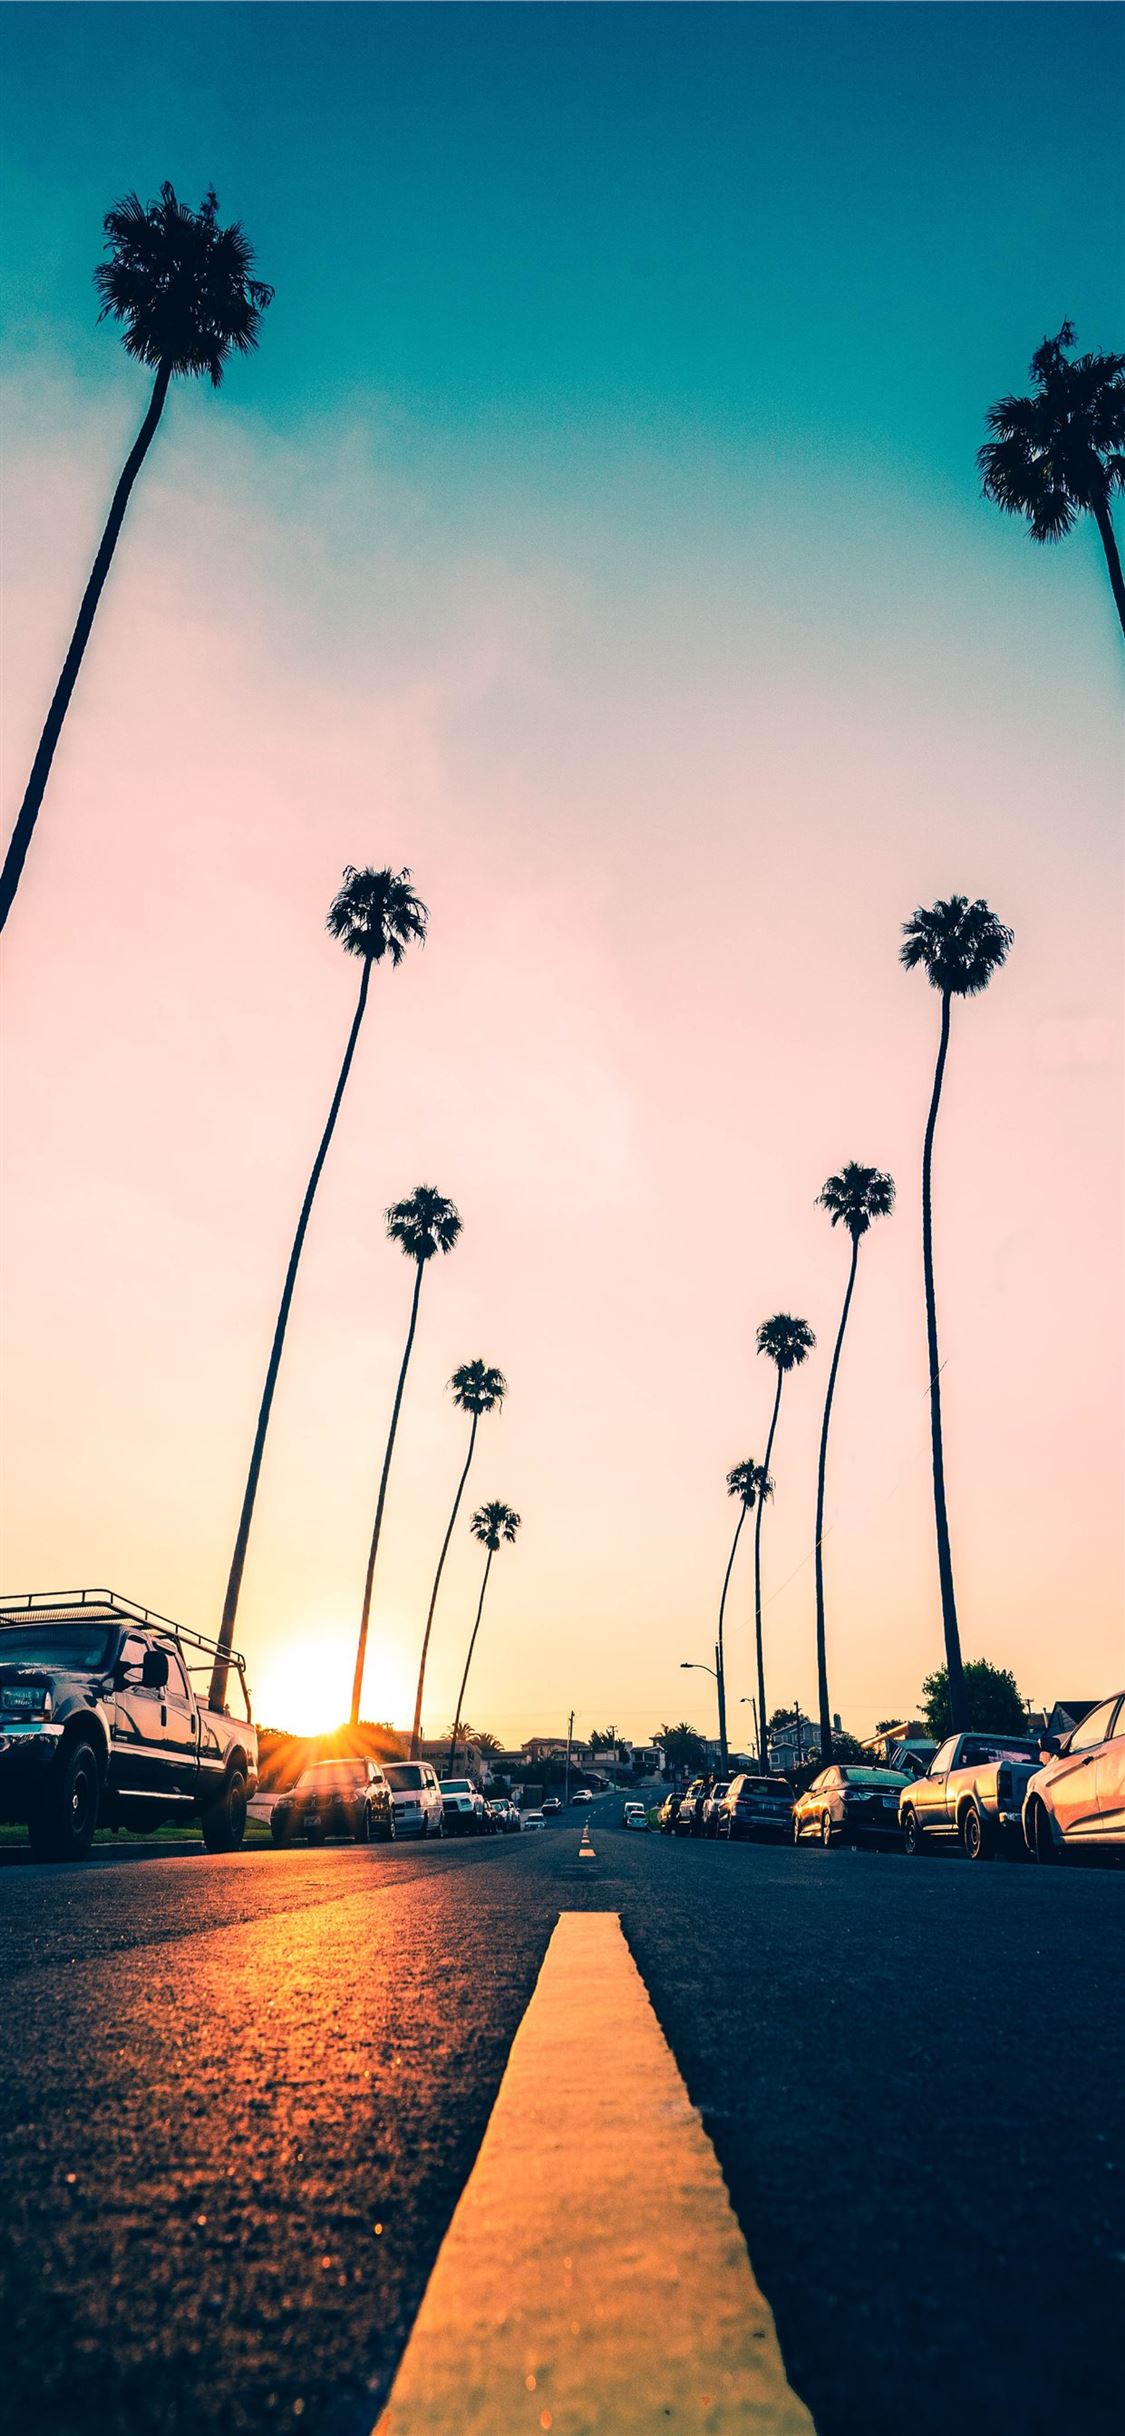 California Wallpaper Featuring Palm Tree Silhouettes Stock Illustration  1820970284 | Shutterstock